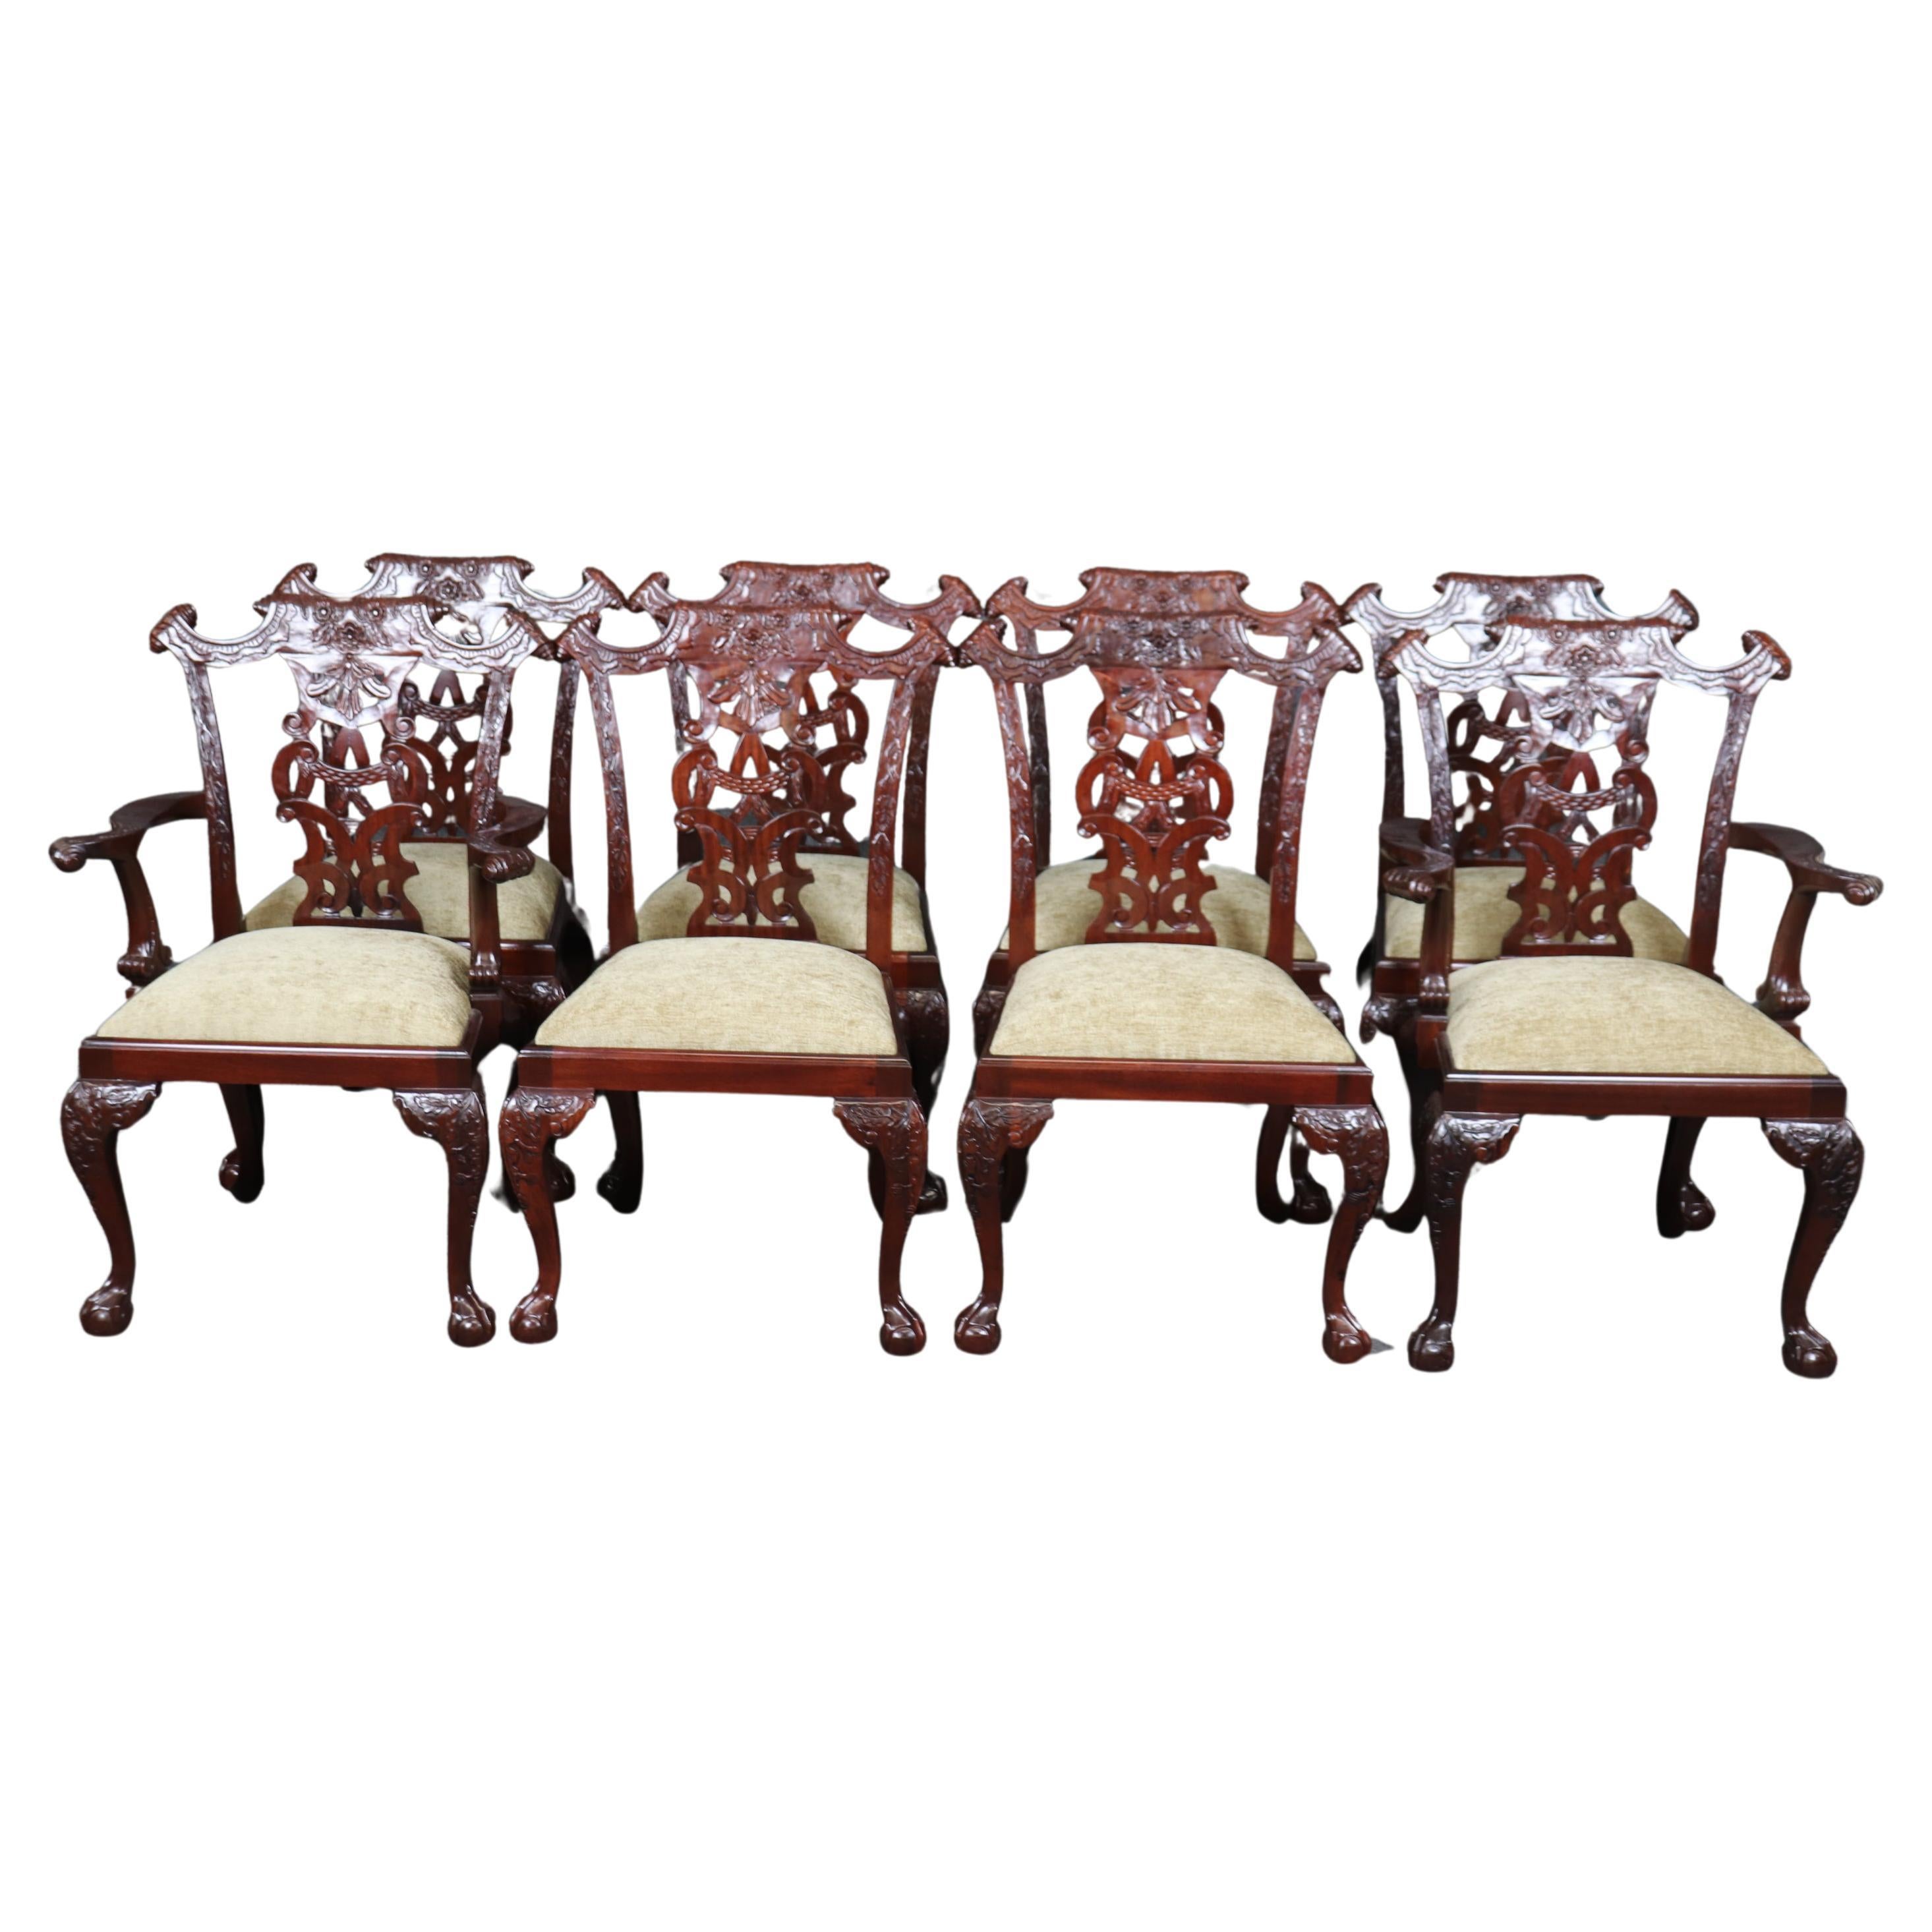 Set of 8 Spectacular Solid Mahogany Elaborately Carved Chippendale Dining Chairs For Sale